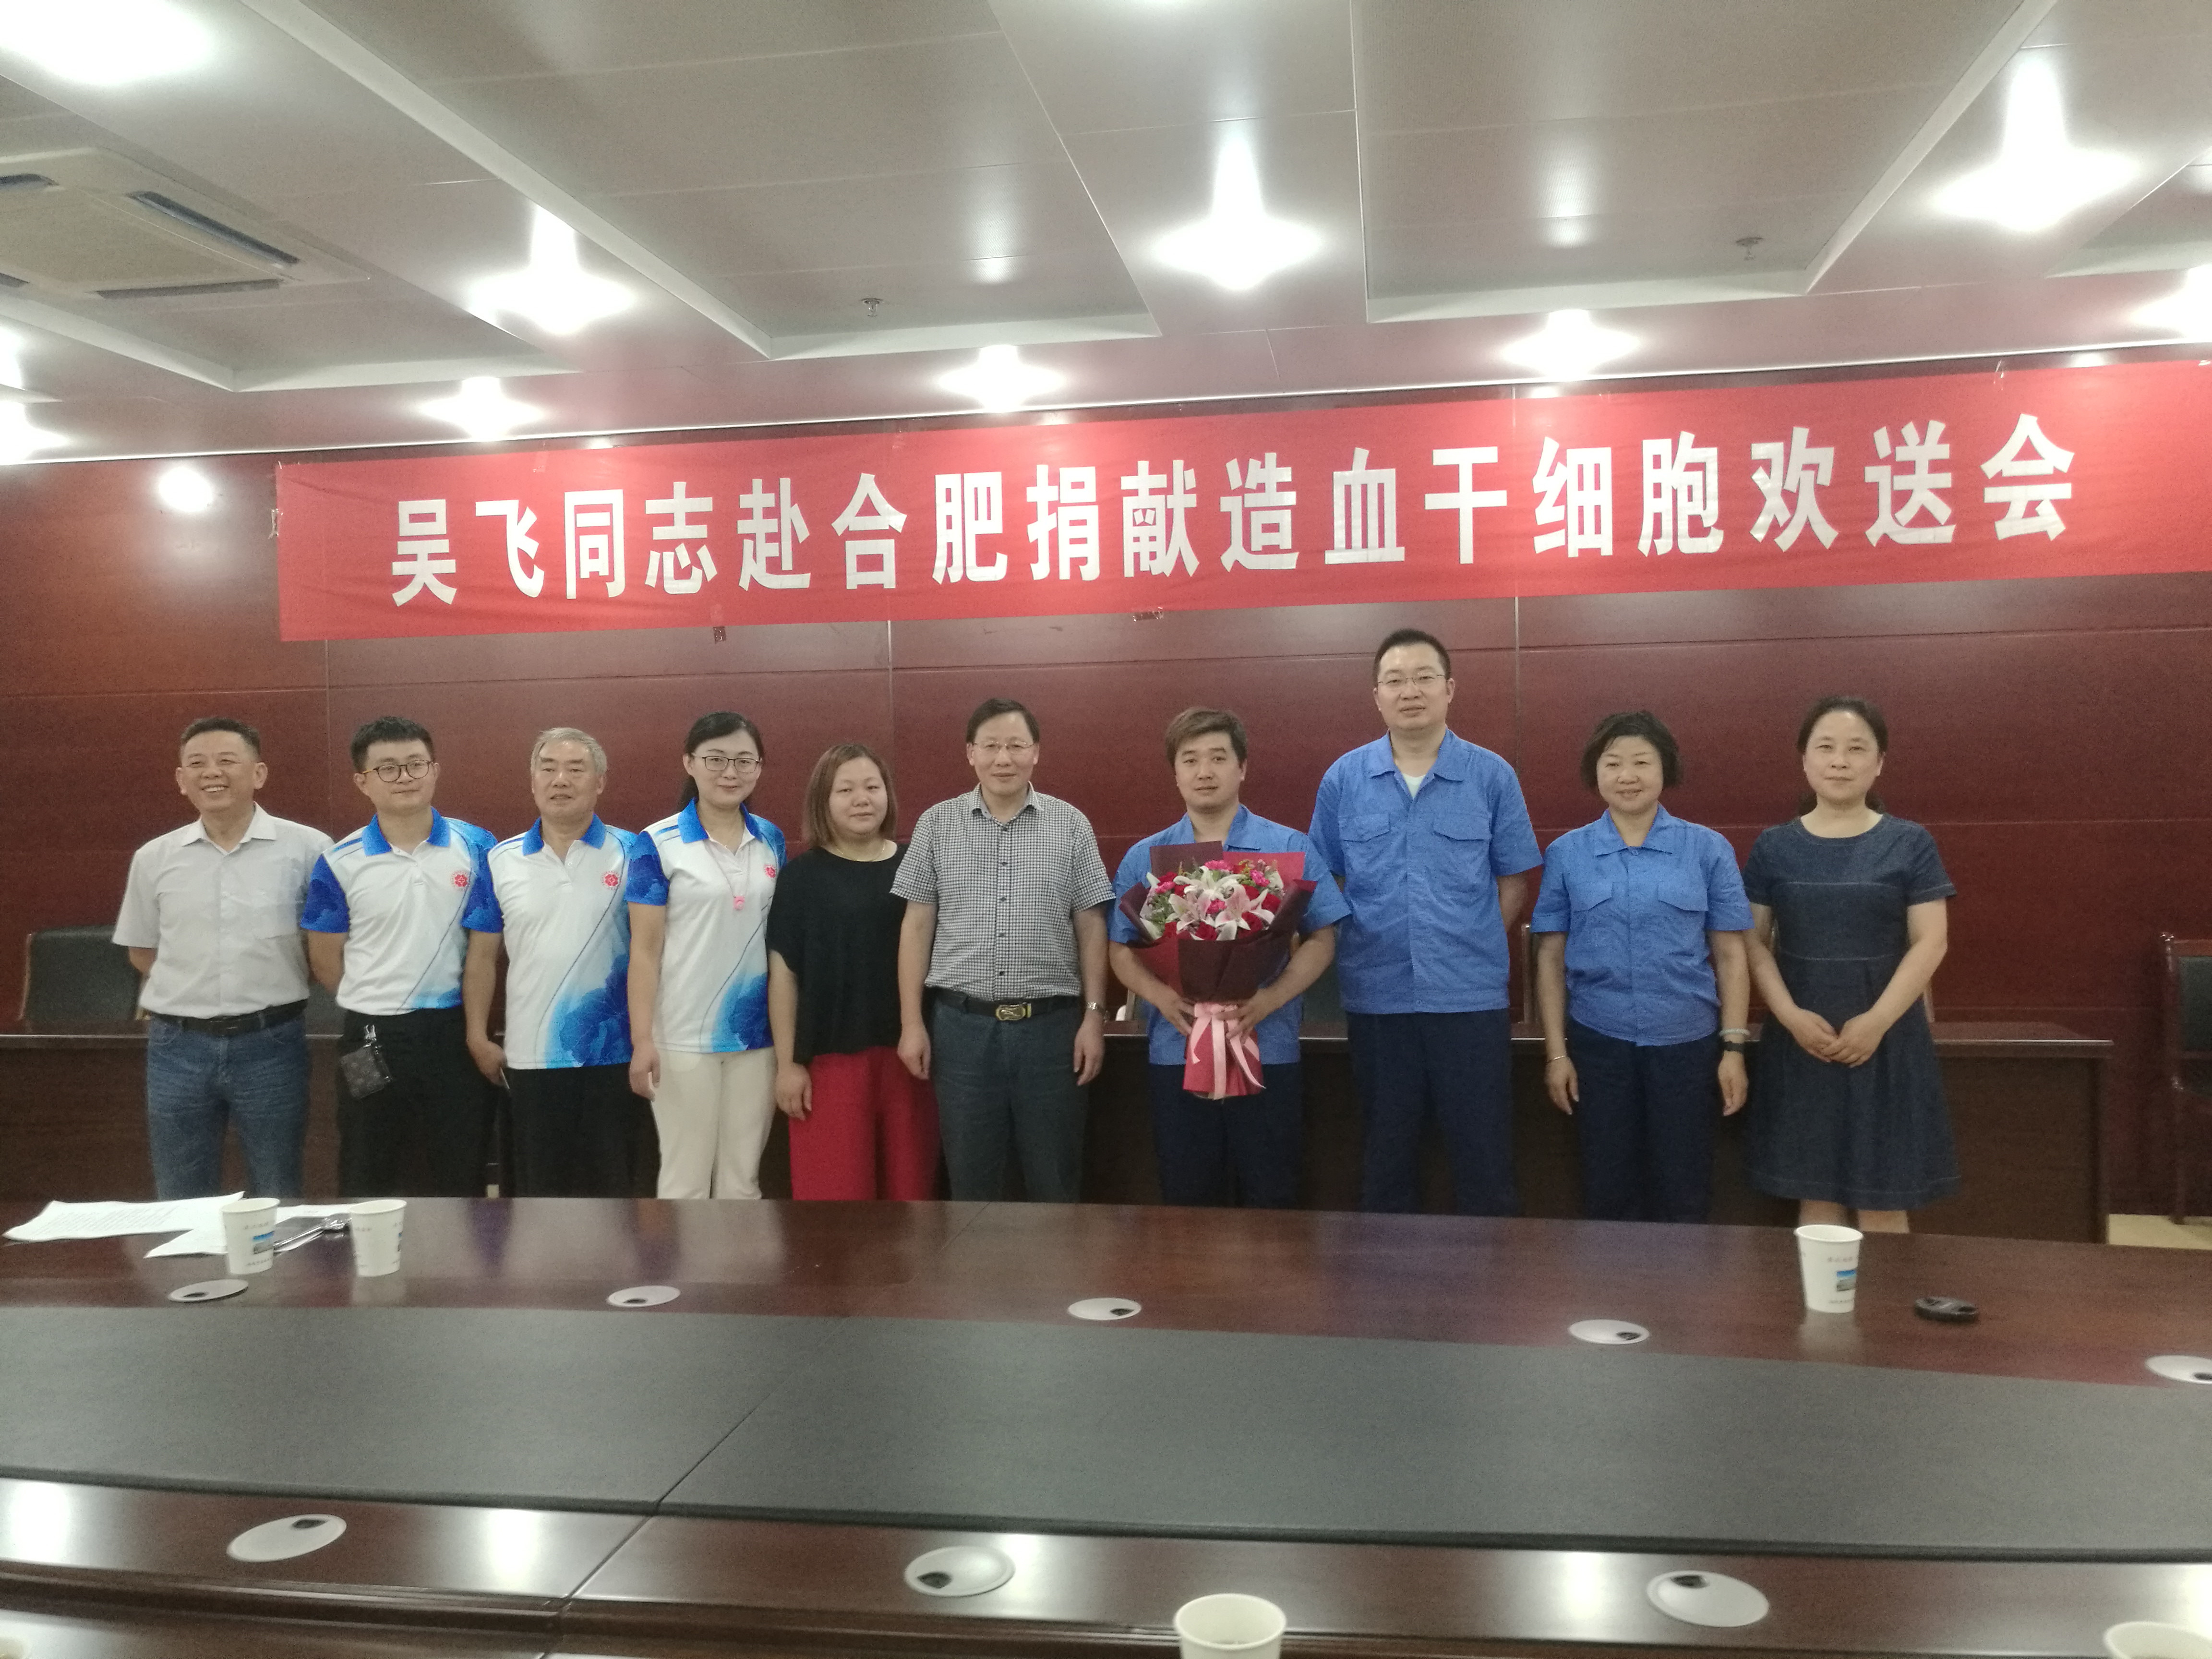 The worker Wu Fei from ARN Group became the tenth person to donate hematopoietic stem cells in Anqing